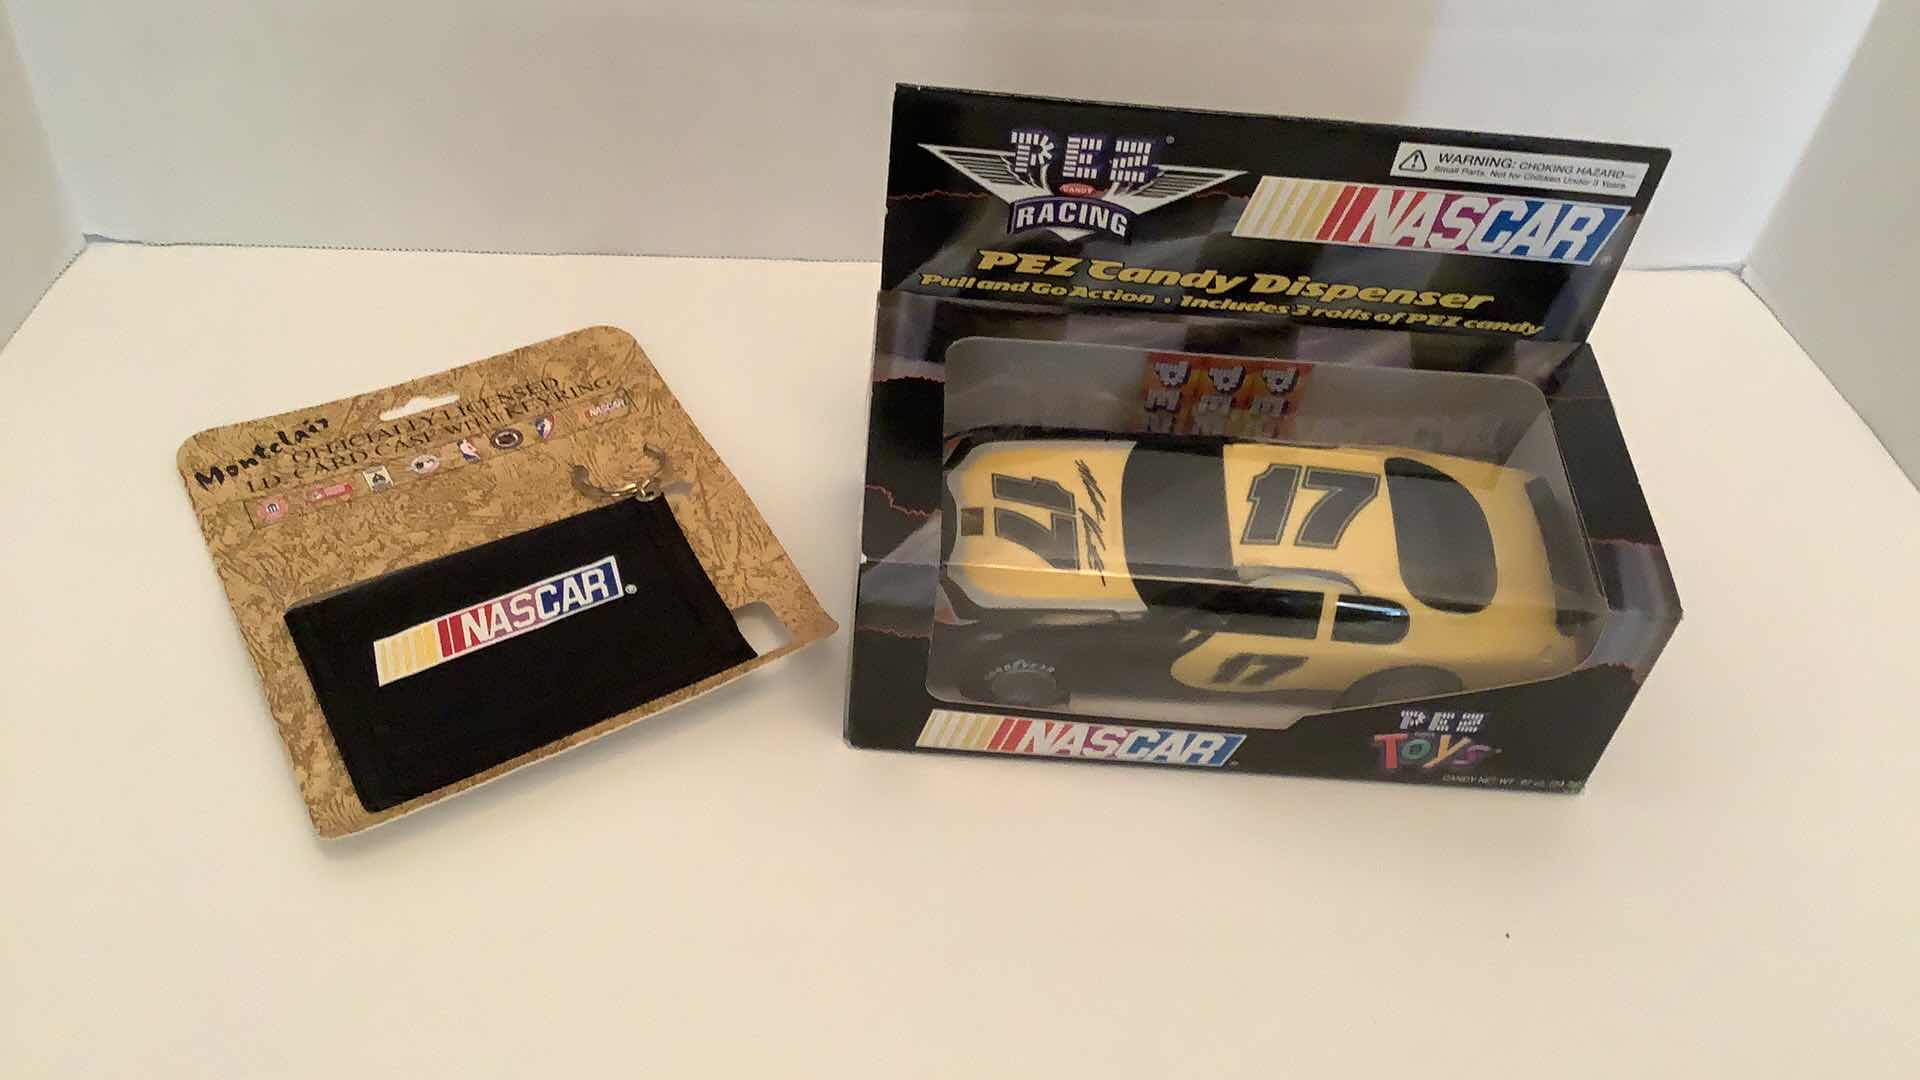 Photo 1 of NASCAR #17 PEZ CANDY DISPENSER AND CARD CASE